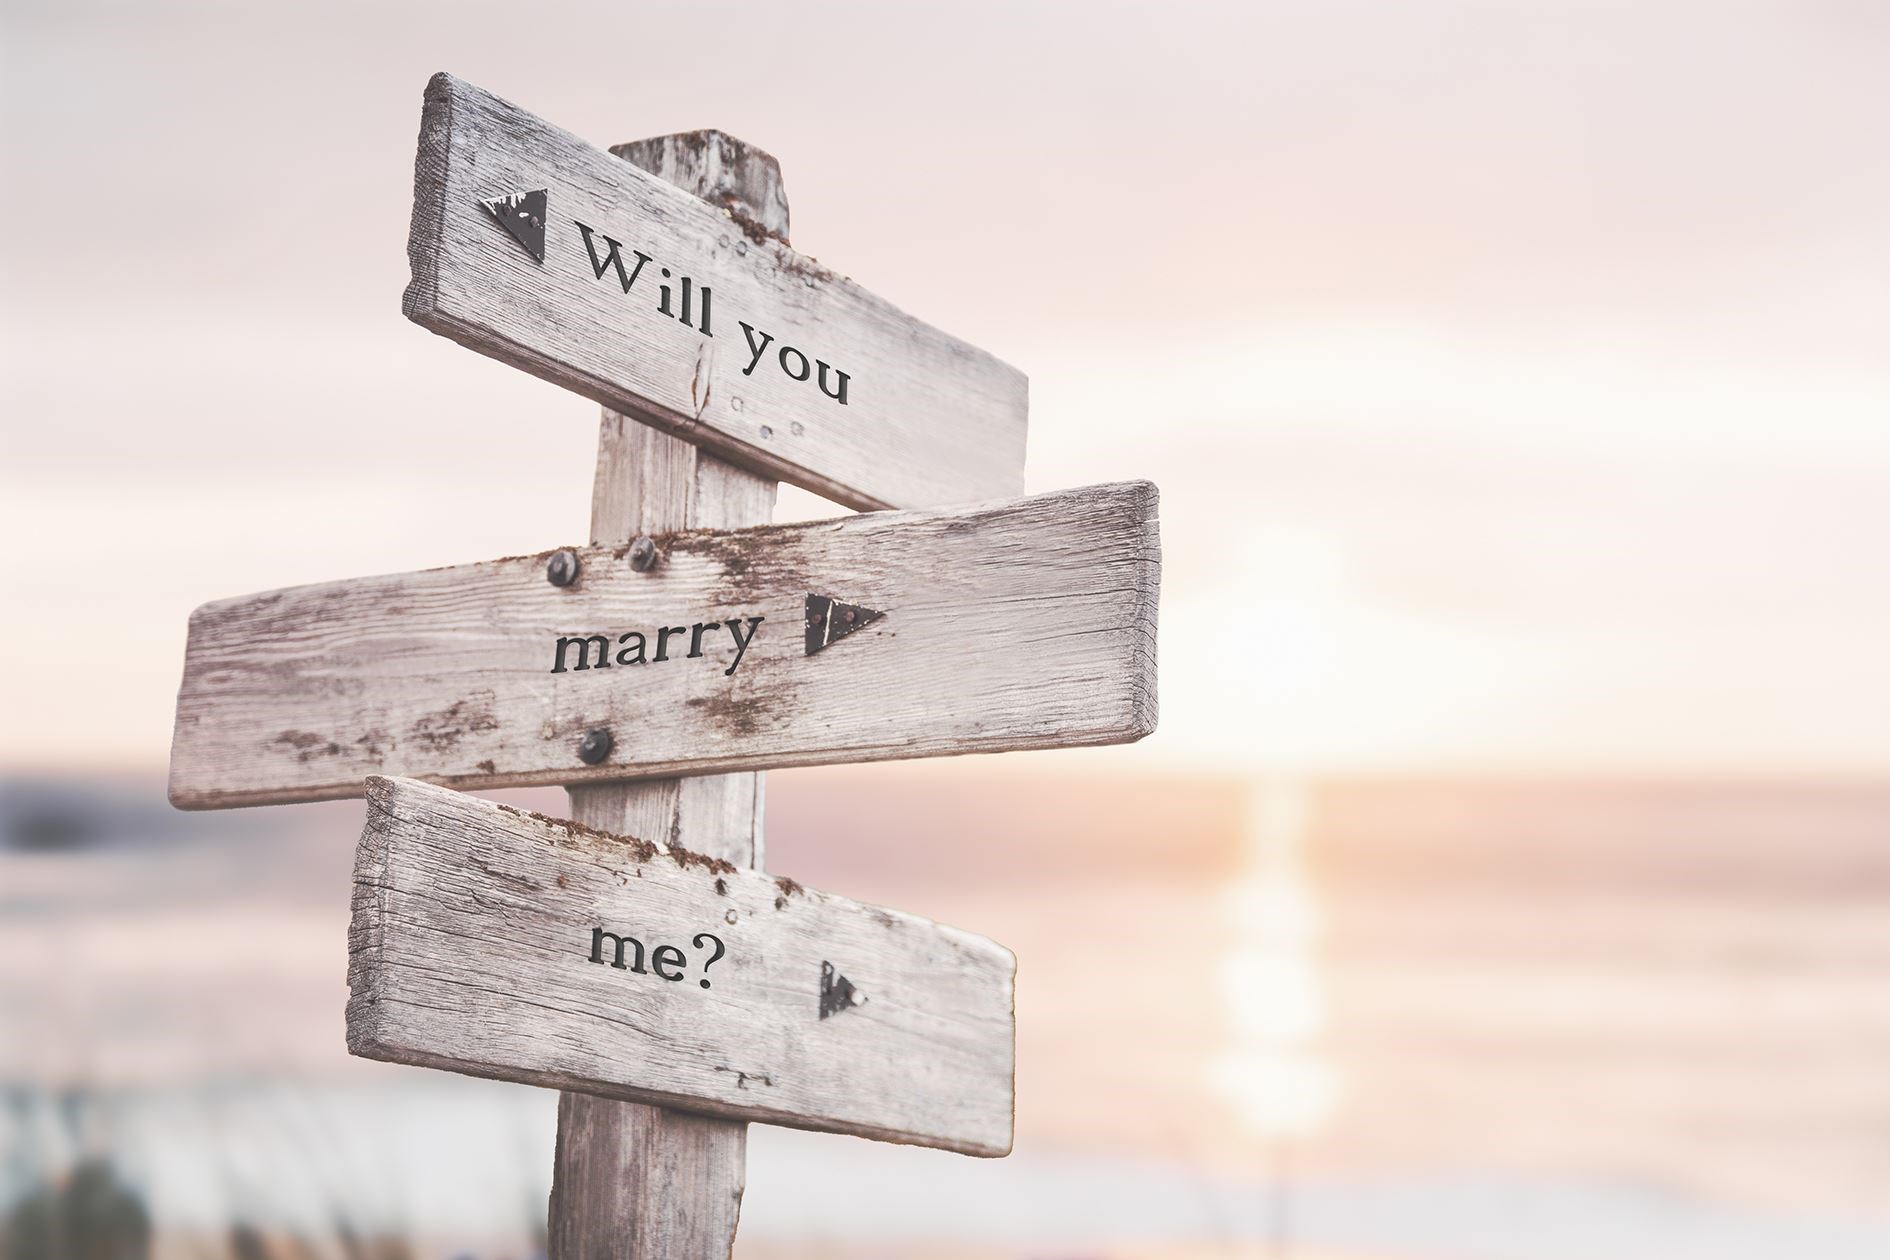 The key question: Will you marry me?